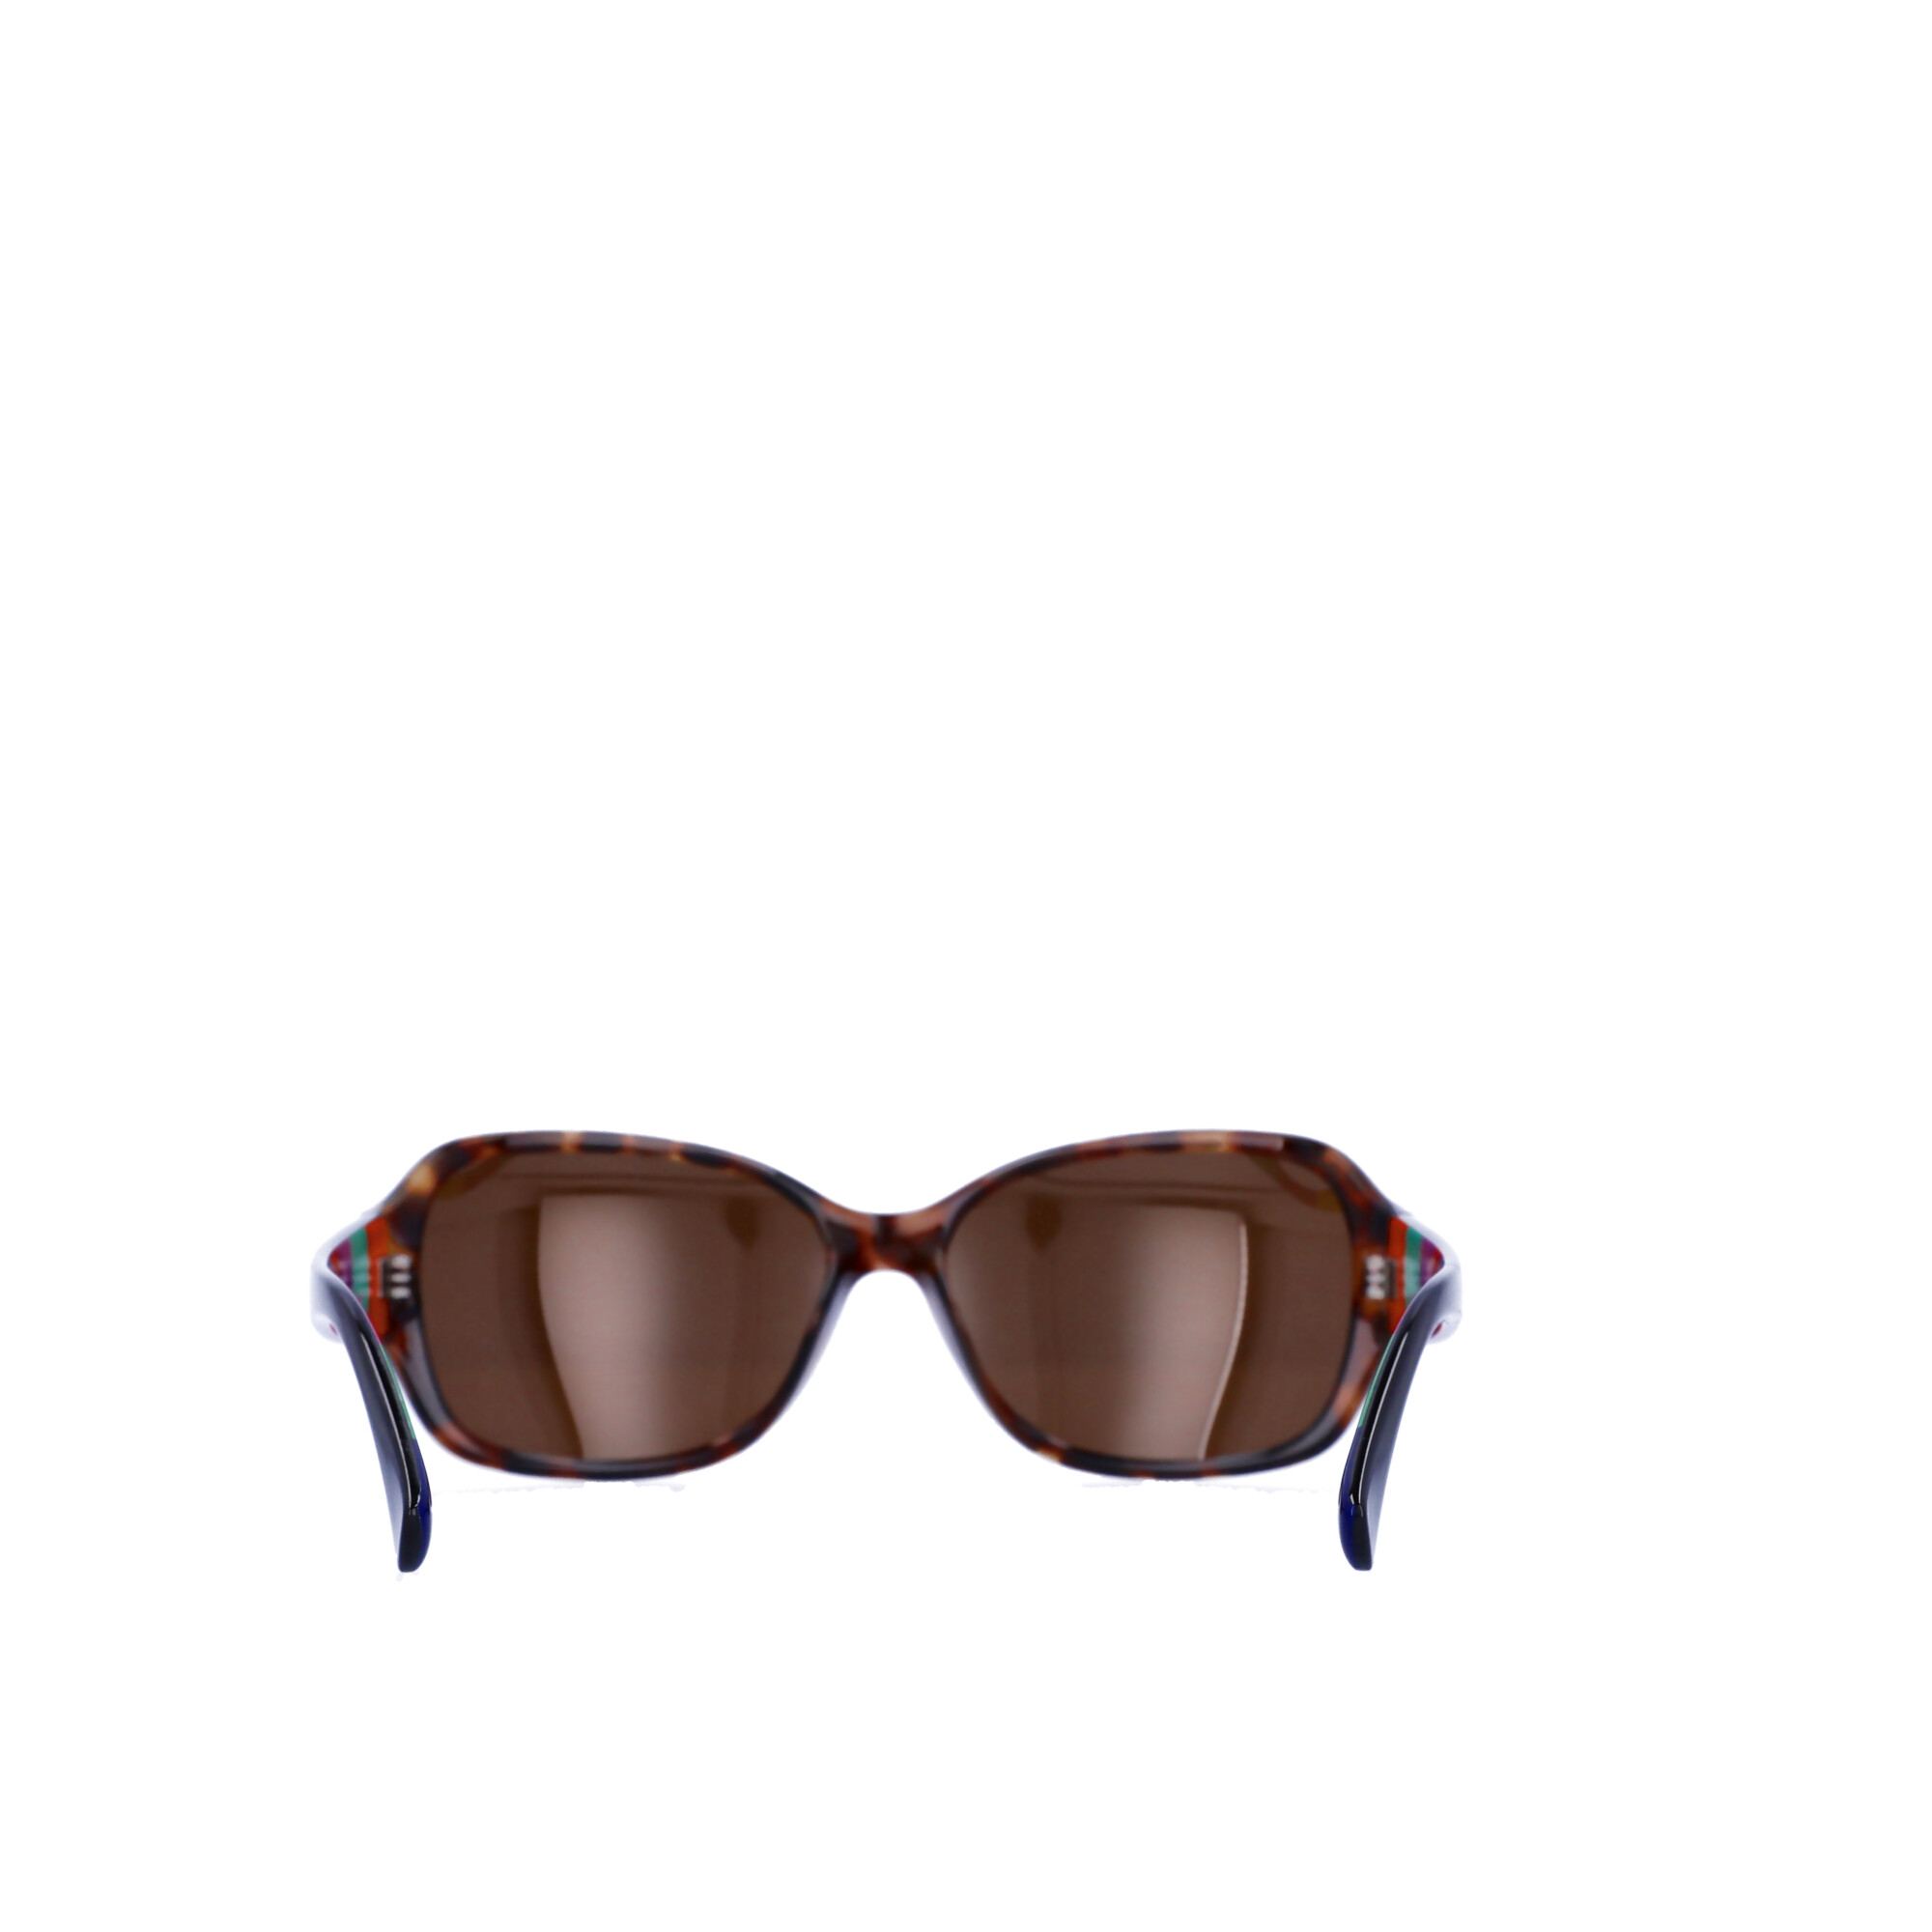 Hard Candy Womens Rx'able Sunglasses, Hs14, Tortoise Patterned, 57-15-138, with Case - image 3 of 13